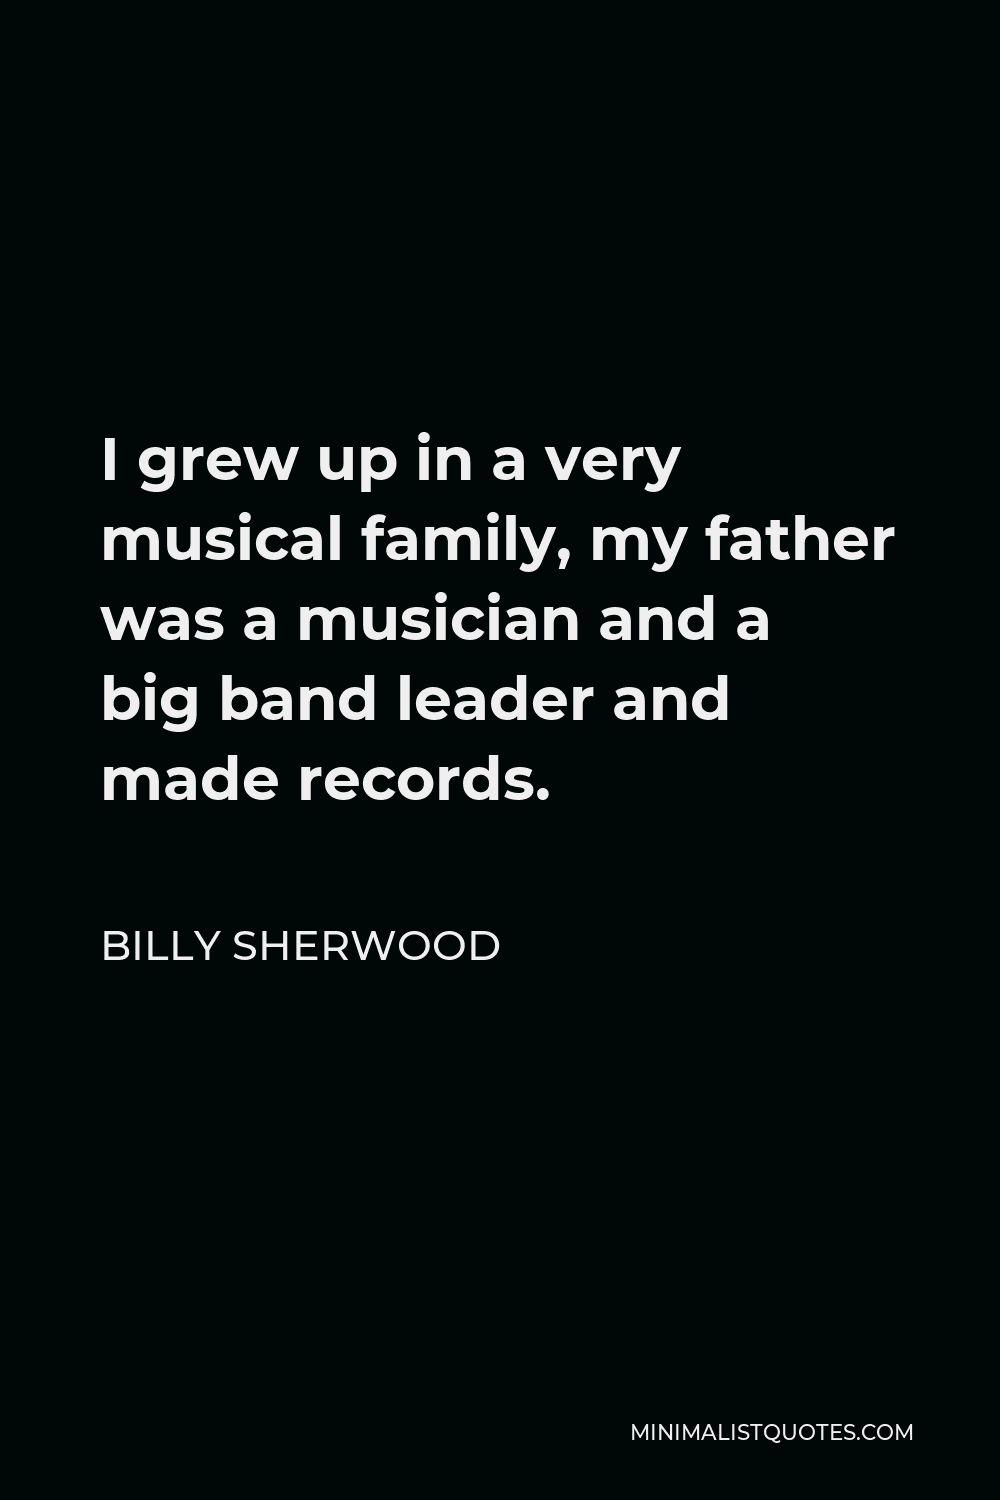 Billy Sherwood Quote - I grew up in a very musical family, my father was a musician and a big band leader and made records.